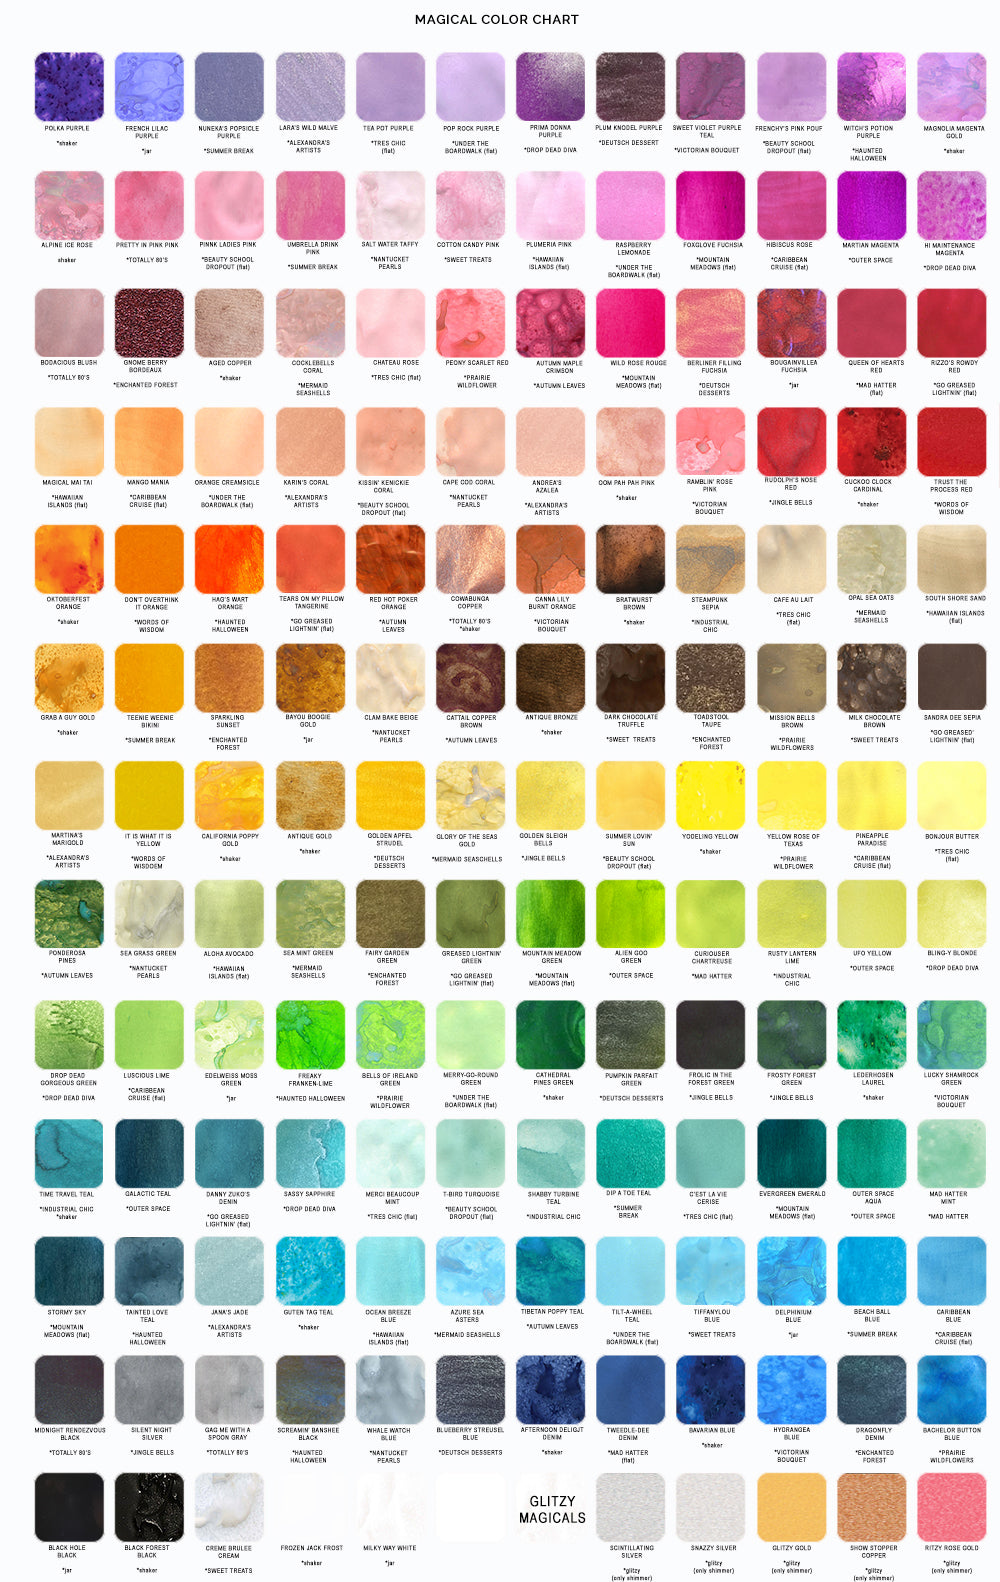 MAGICAL COLOR CHART | Lindy's Gang Store